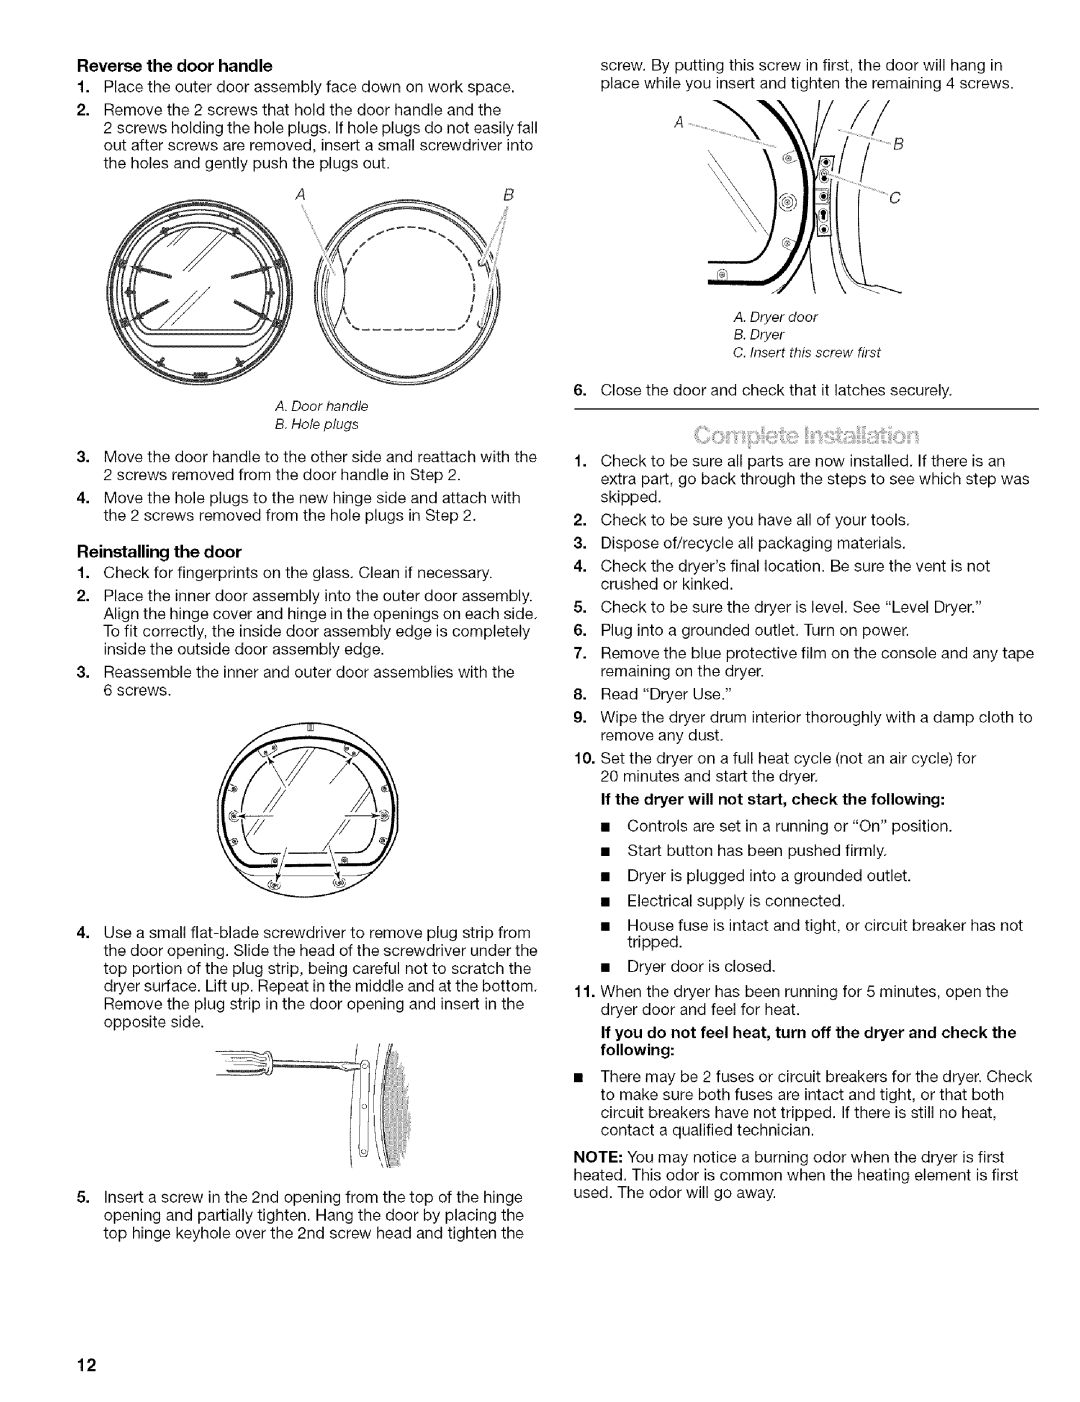 Kenmore C8587, C8586 manual Reverse the door handle, If you do not feel heat, turn off the dryer and check the following 